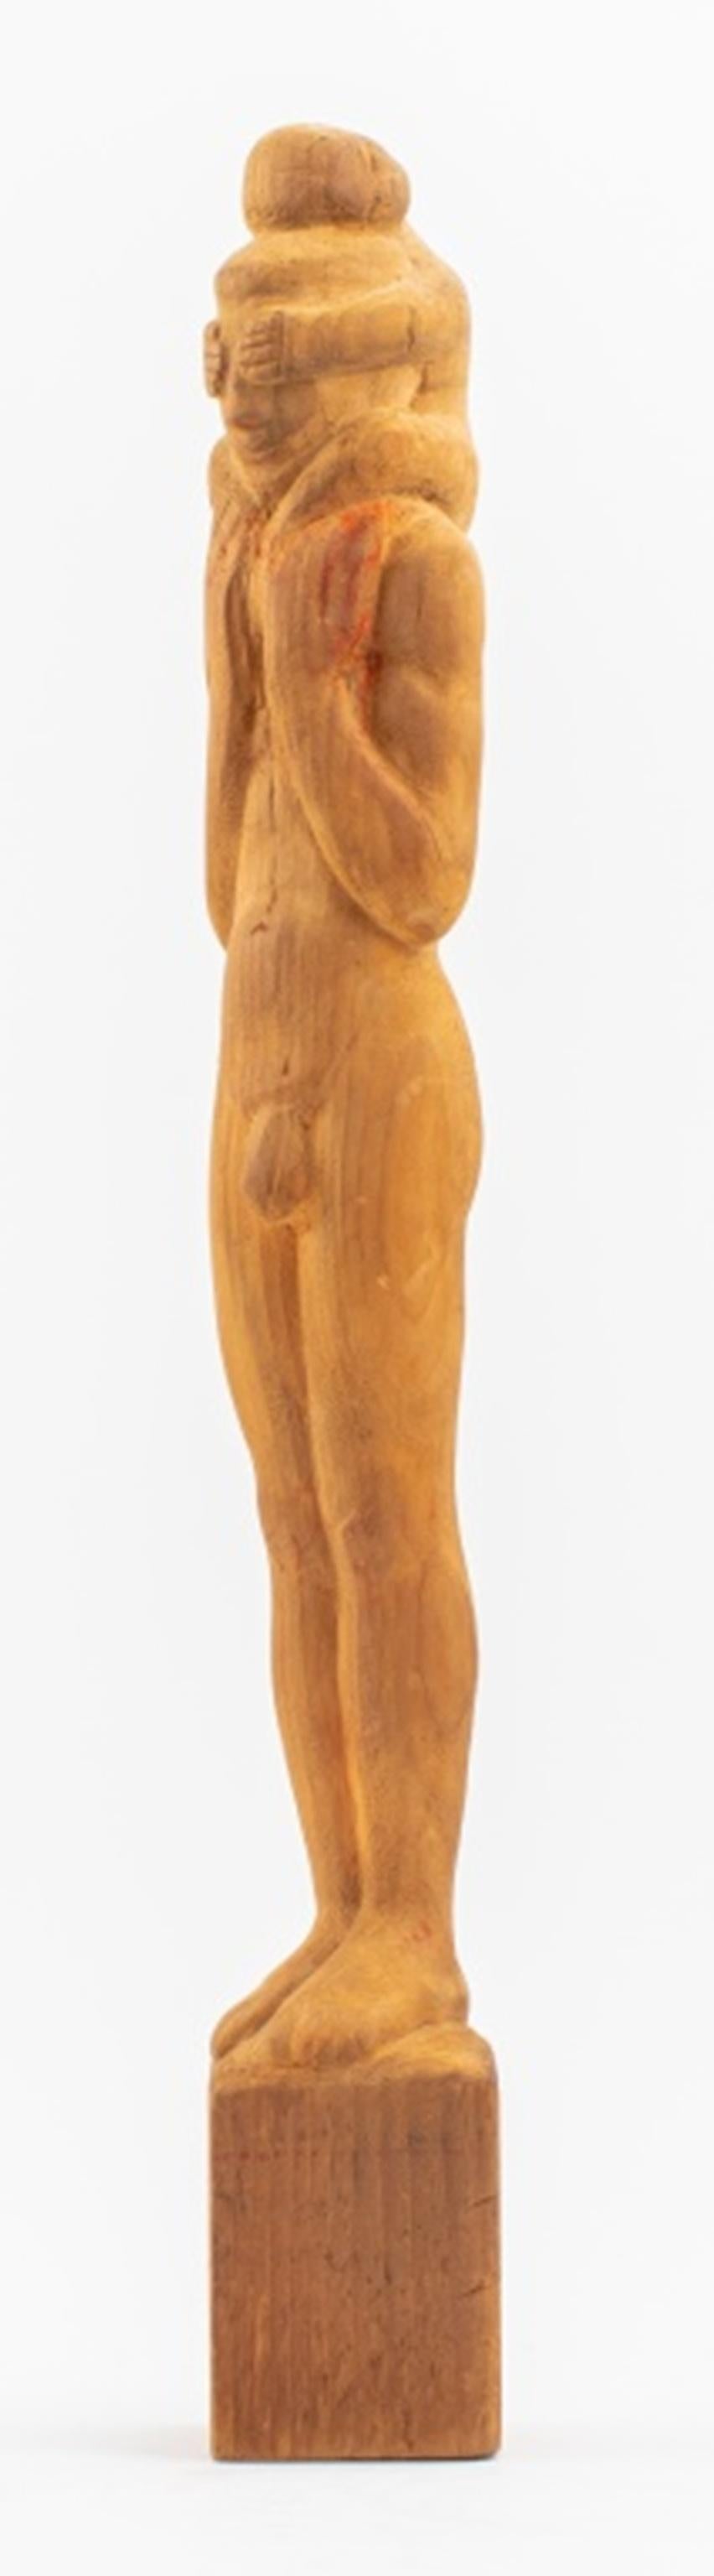 Americana Folk Art wood carved statue sculpture depicting a standing nude man with a child on his shoulders covering his eyes, apparently unsigned, first half of the twentieth century. In very good vintage condition. 

Dealer: S138XX